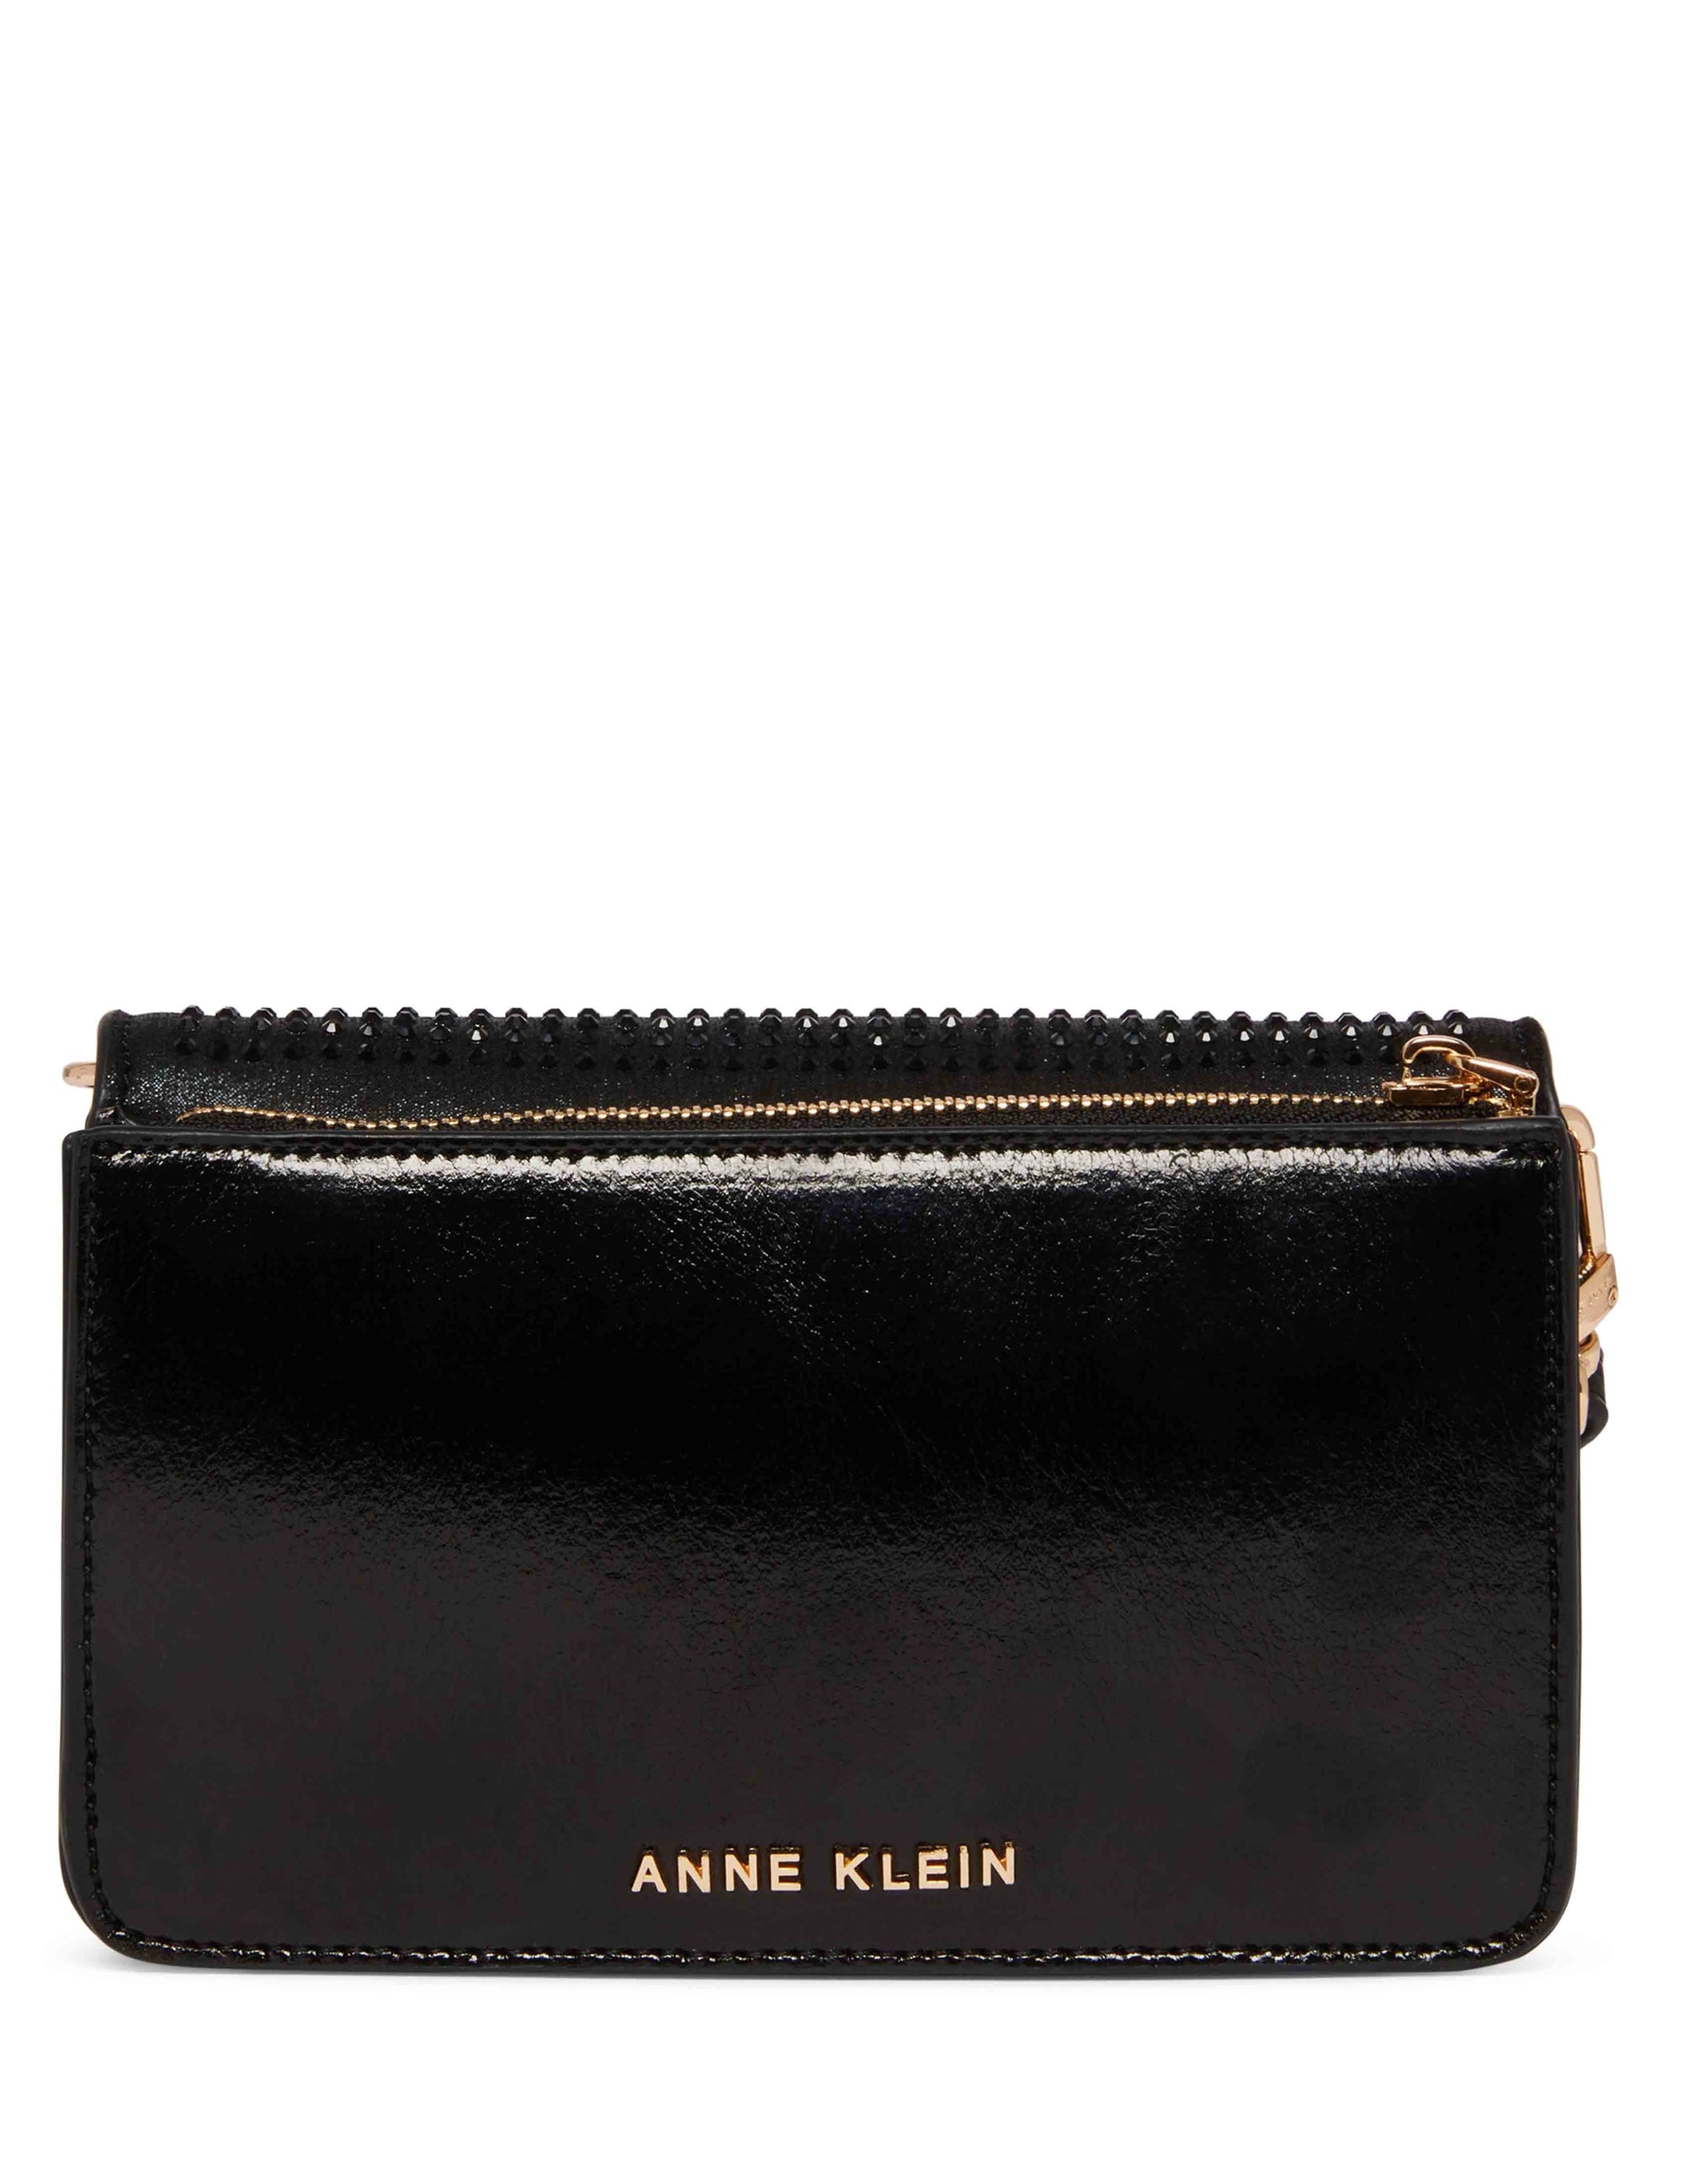 Anne Klein Small Flap Crossbody with Web Strap